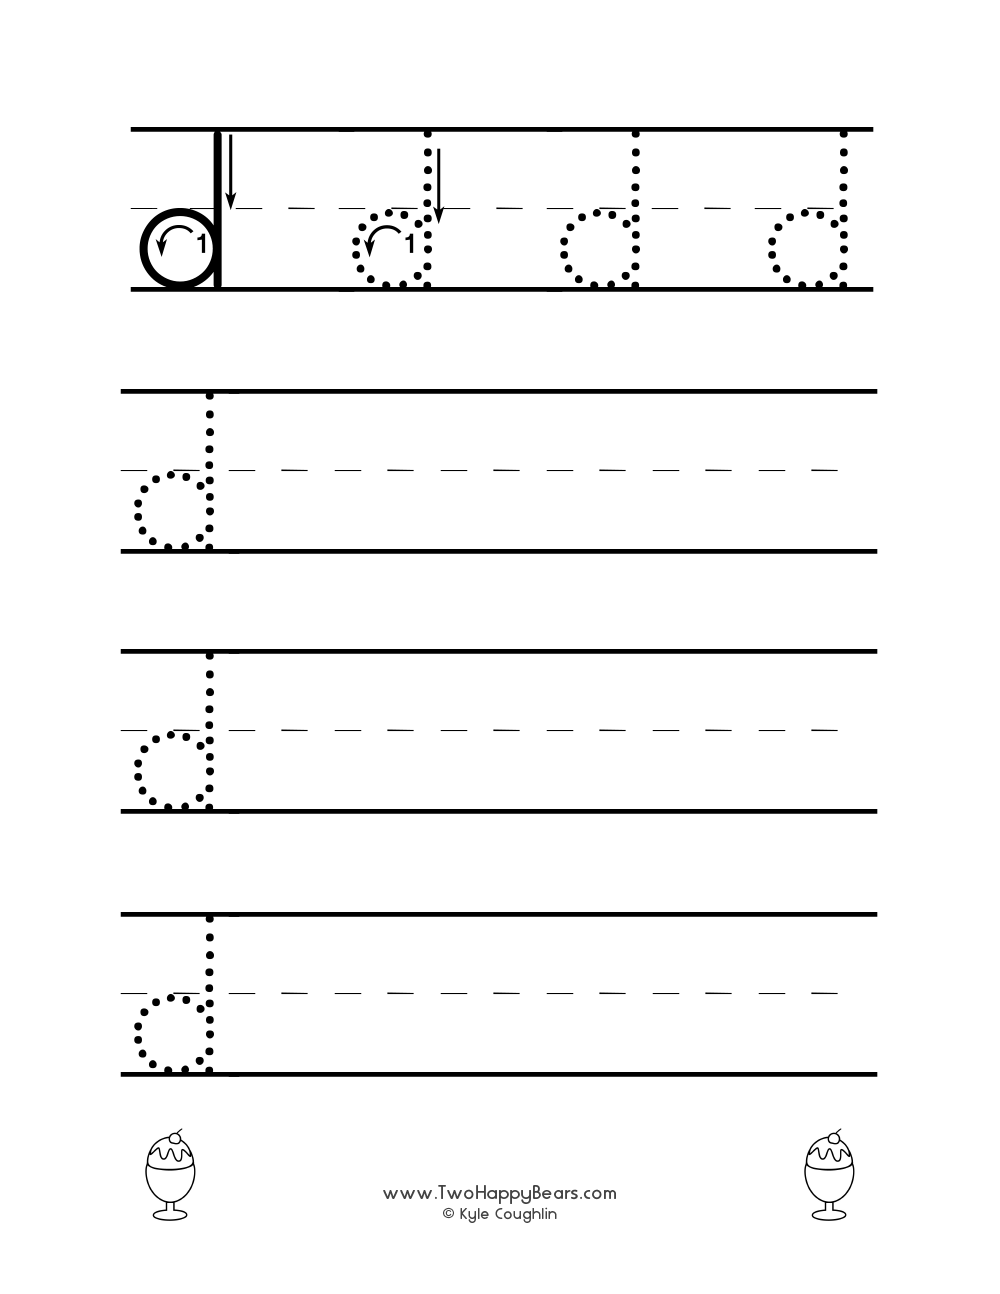 Worksheet for tracing and writing the lowercase letter D, in free printable PDF format.